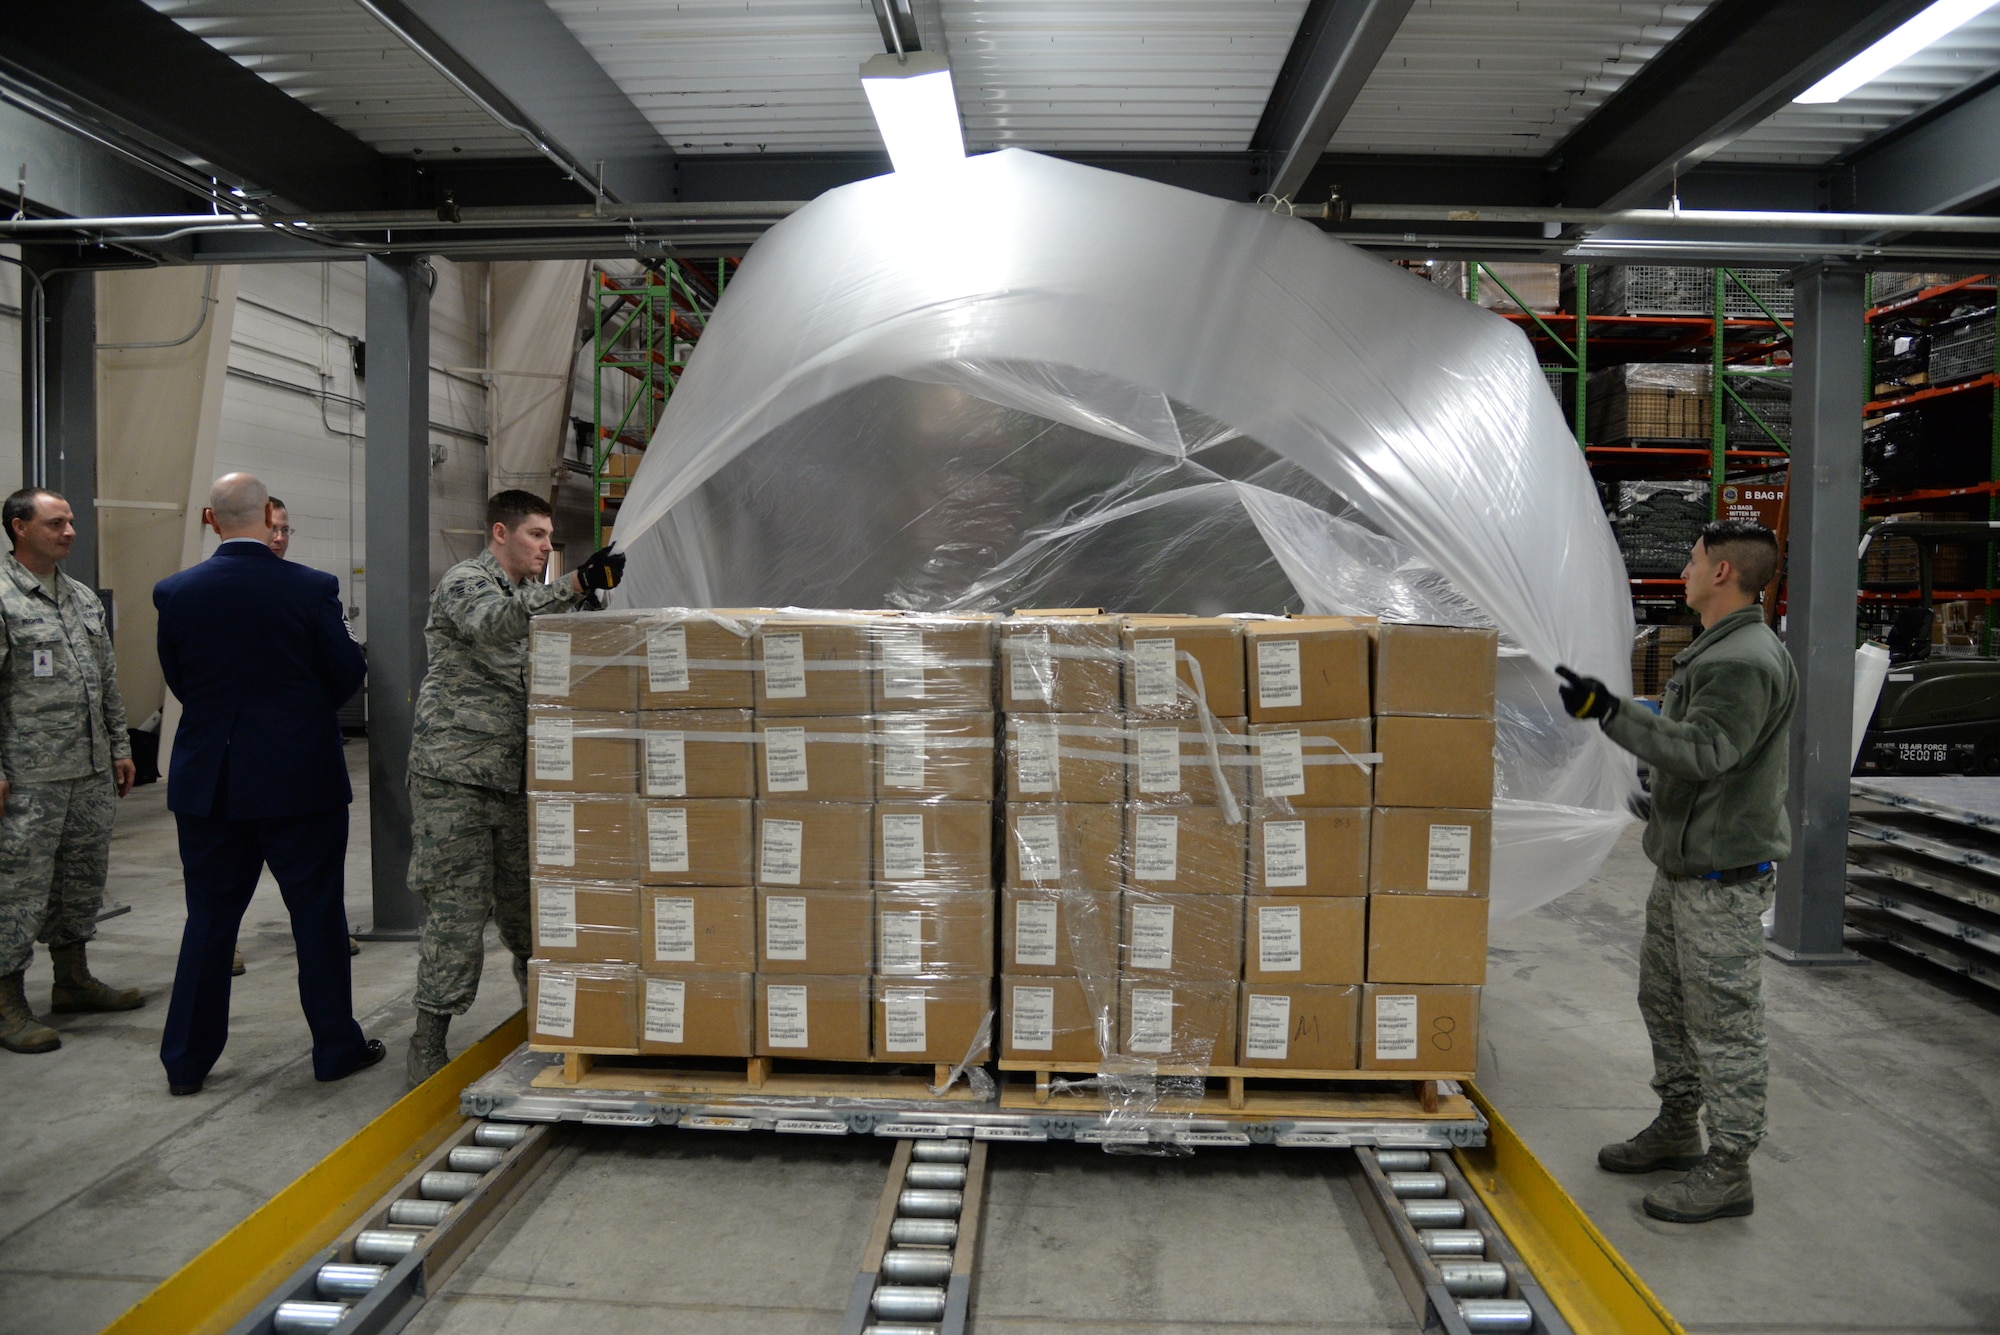 Airmen 1st Class Matthew Moneymaker-Grizzle and Ryan Chamberlain, 436th Aerial Port Squadron cargo processors, prepare a pallet of gas masks during a Civil Reserve Air Fleet readiness exercise Nov. 13, 2017, at Dover Air Force Base, Del. Each pallet was covered in plastic to protect it from the elements and strapped down to secure the contents for flight. (U.S. Air Force photo by Staff Sgt. Aaron J. Jenne)